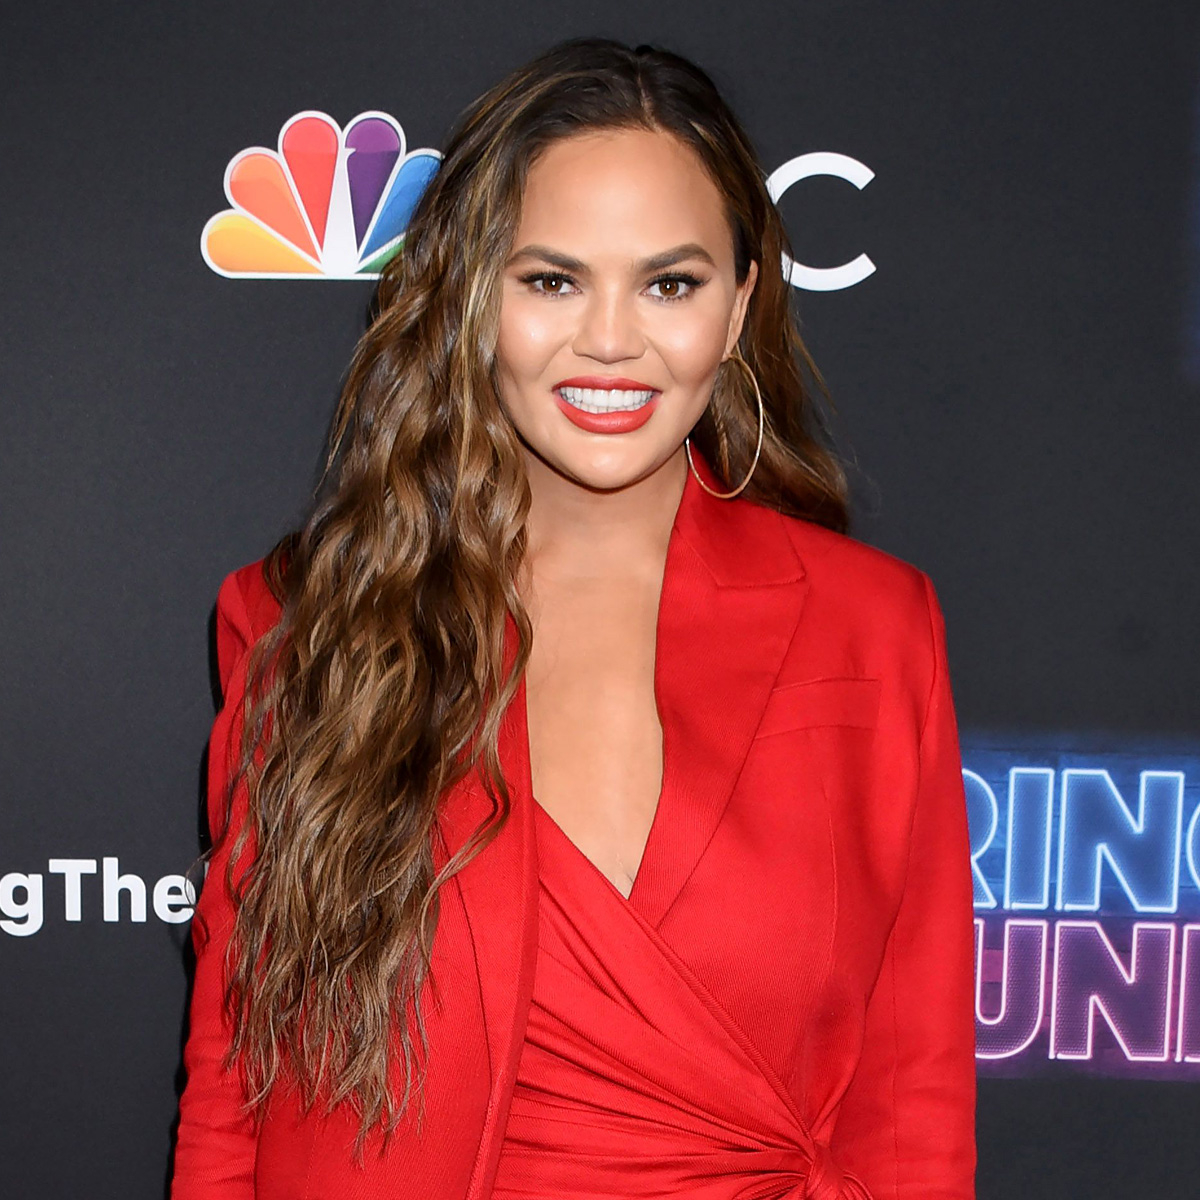 Chrissy Teigen Slams Critic Over Comments About Her Appearance